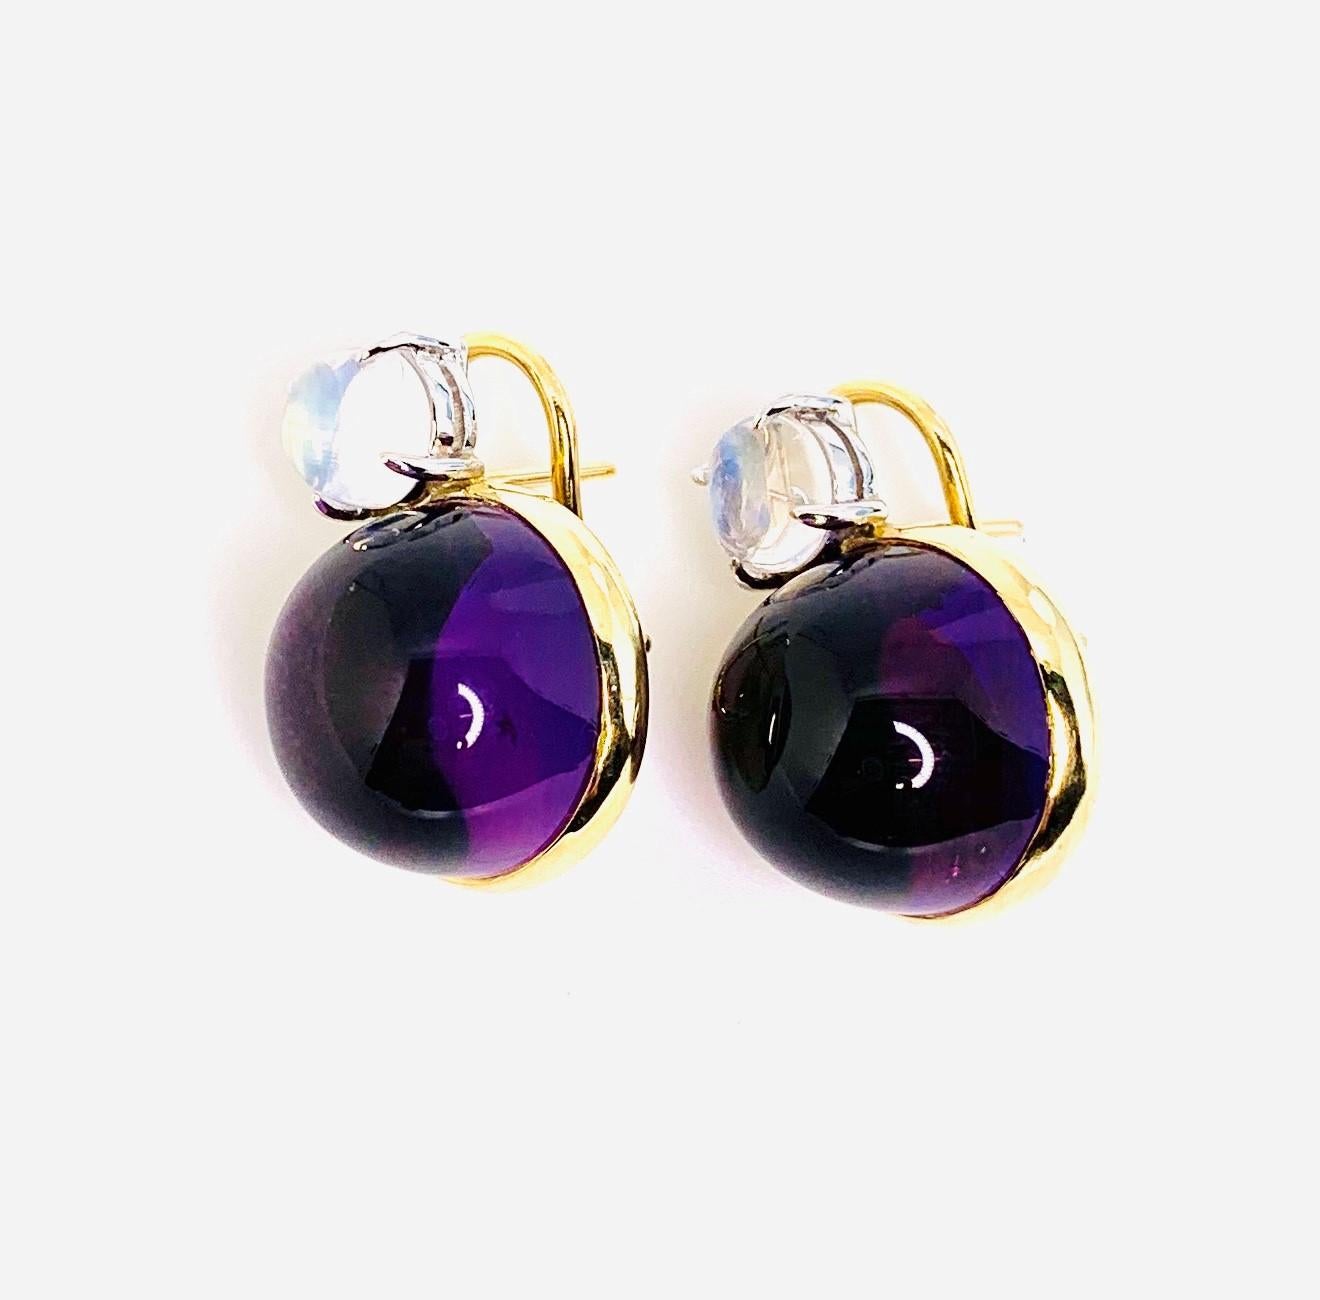 Giant amethyst cabochons set with glorious moonstones are featured in these 18k yellow gold French clip drop earrings. The amethysts are the color and size of luscious Concord grapes with their perfect outline set flawlessly in rich gold bezels. The